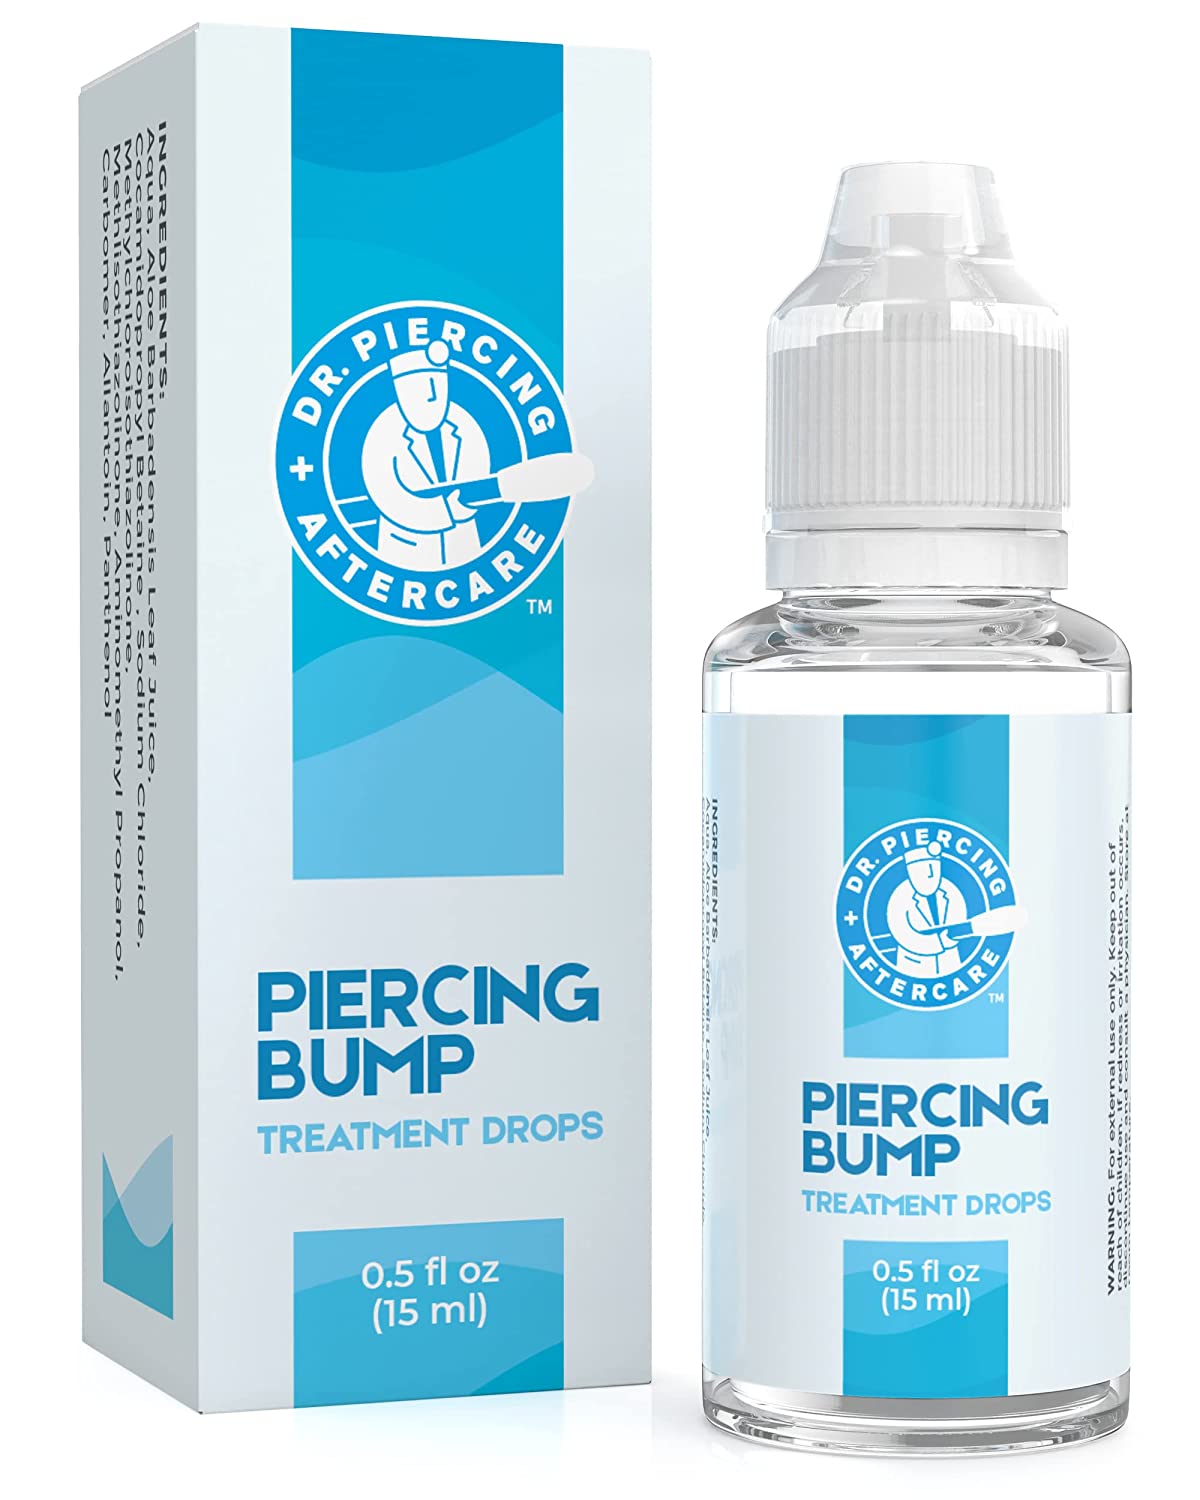 Base Labs Piercing Aftercare Wipes